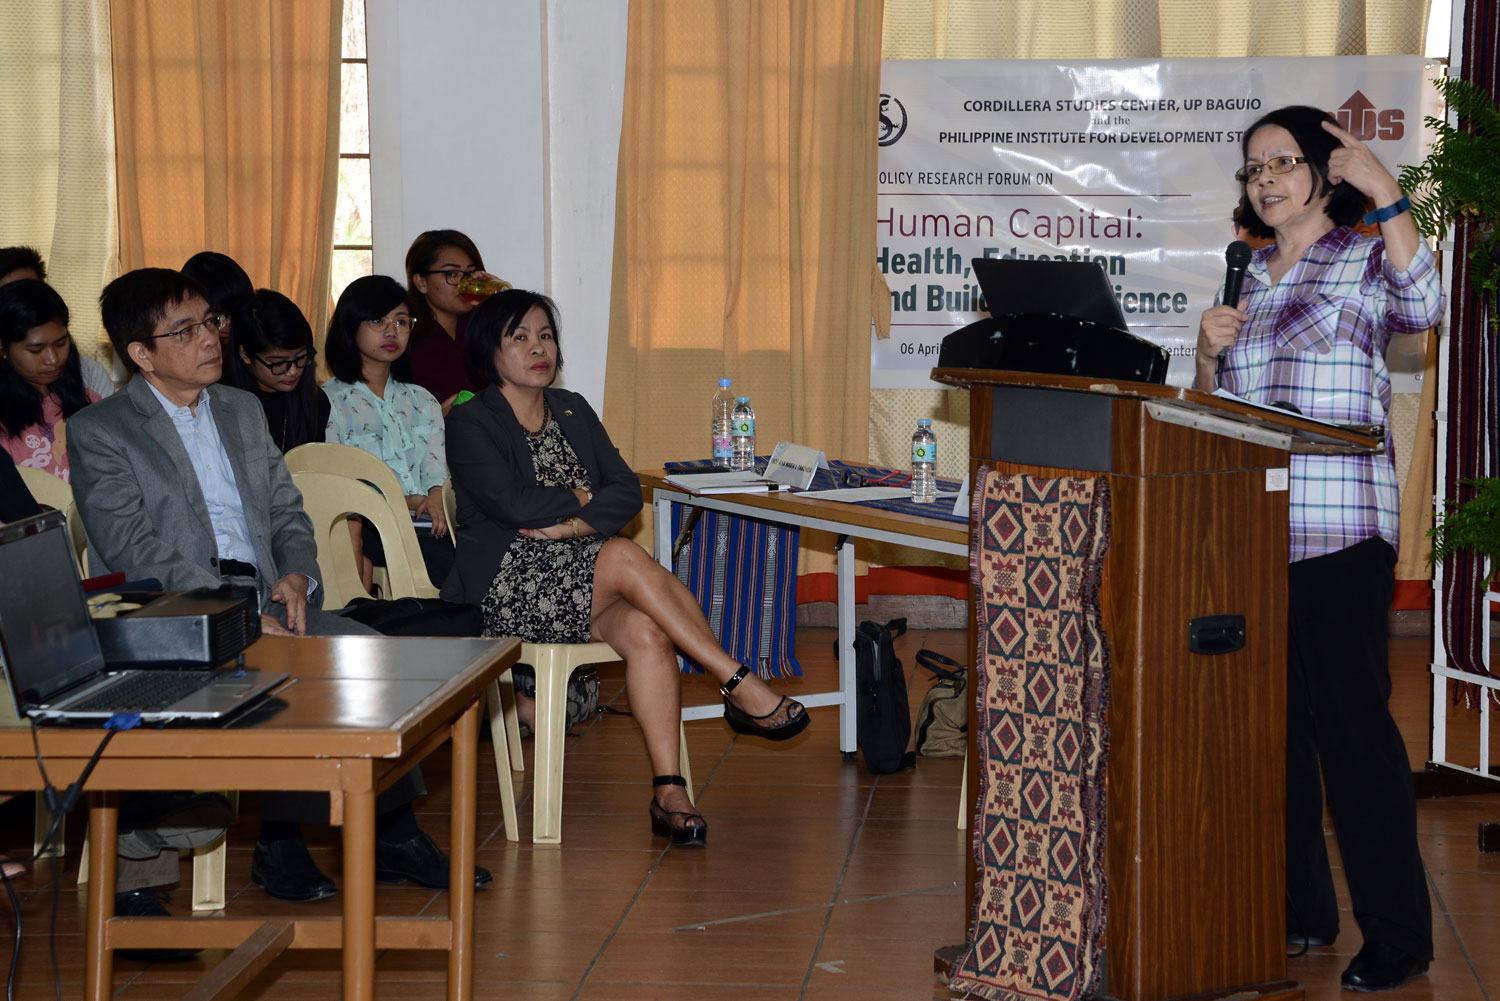 Policy Research Forum on Human Capital: Health, Education, and Building Resilience-DSC_6109.jpg